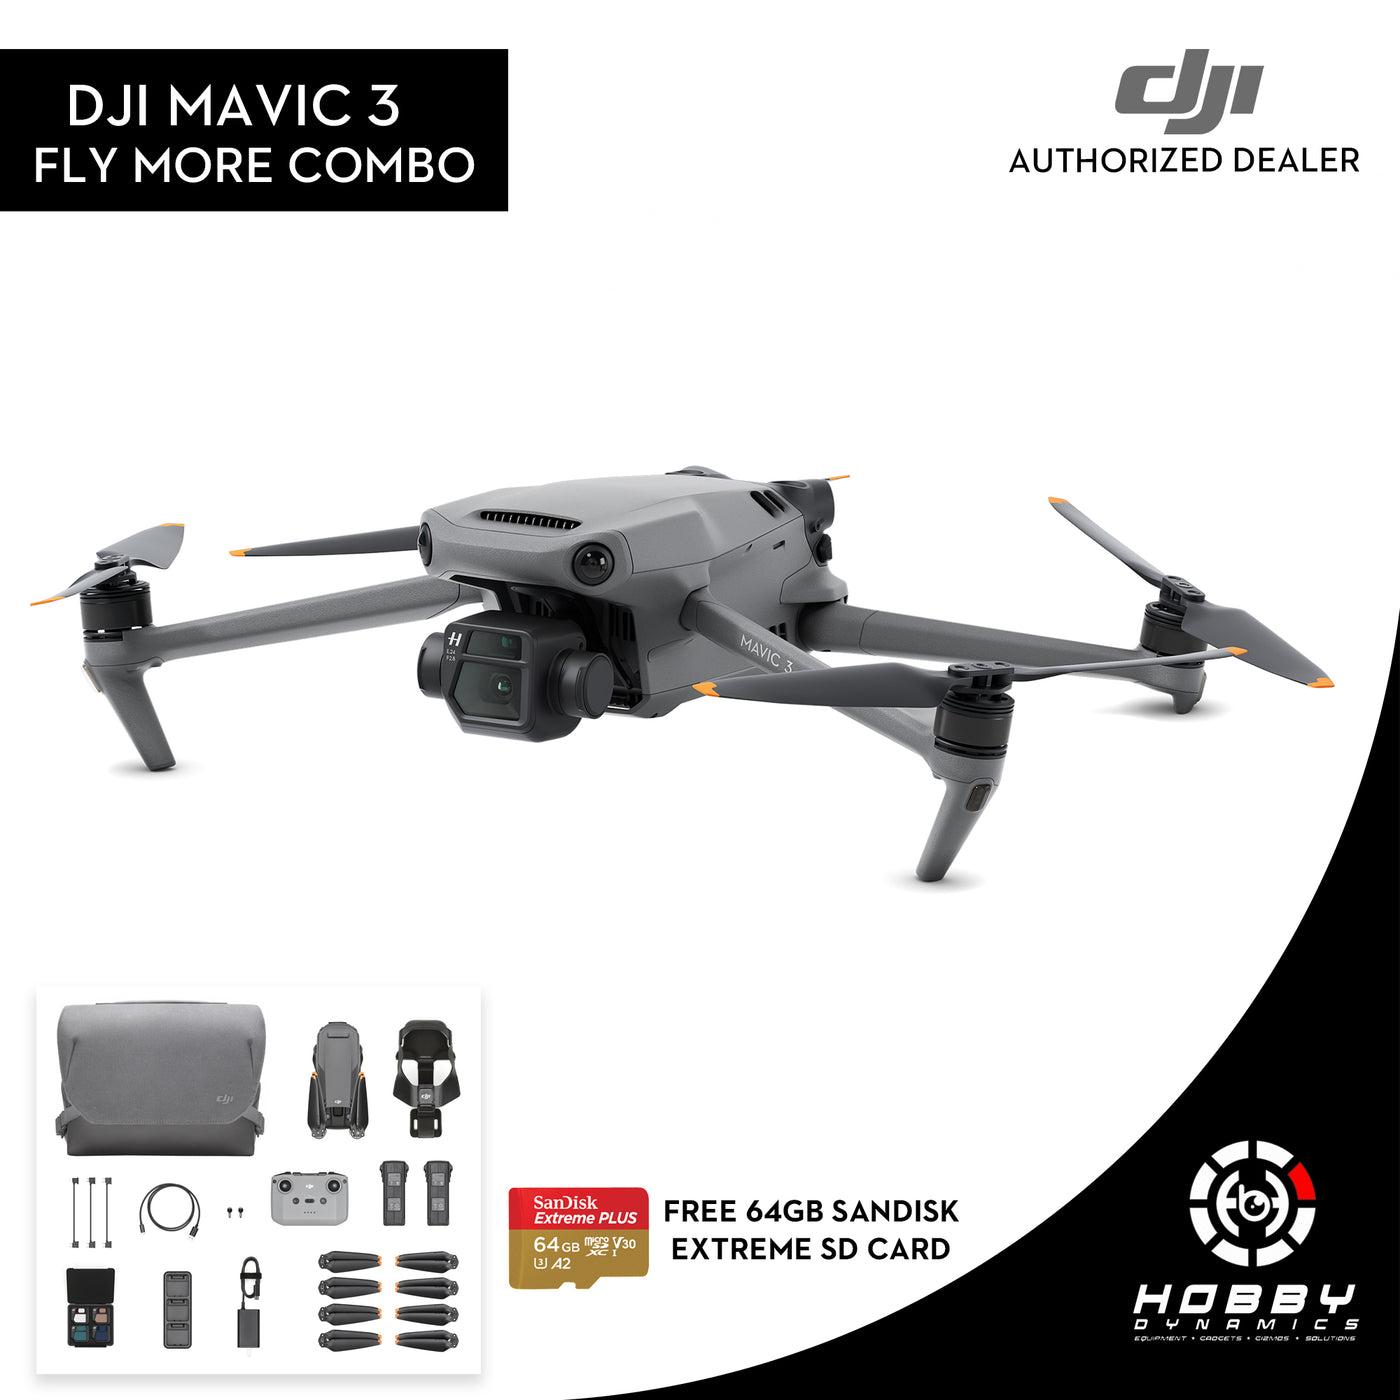 DJI Mavic 3 Fly More Combo with Free Sandisk Extreme 64GB SD Card